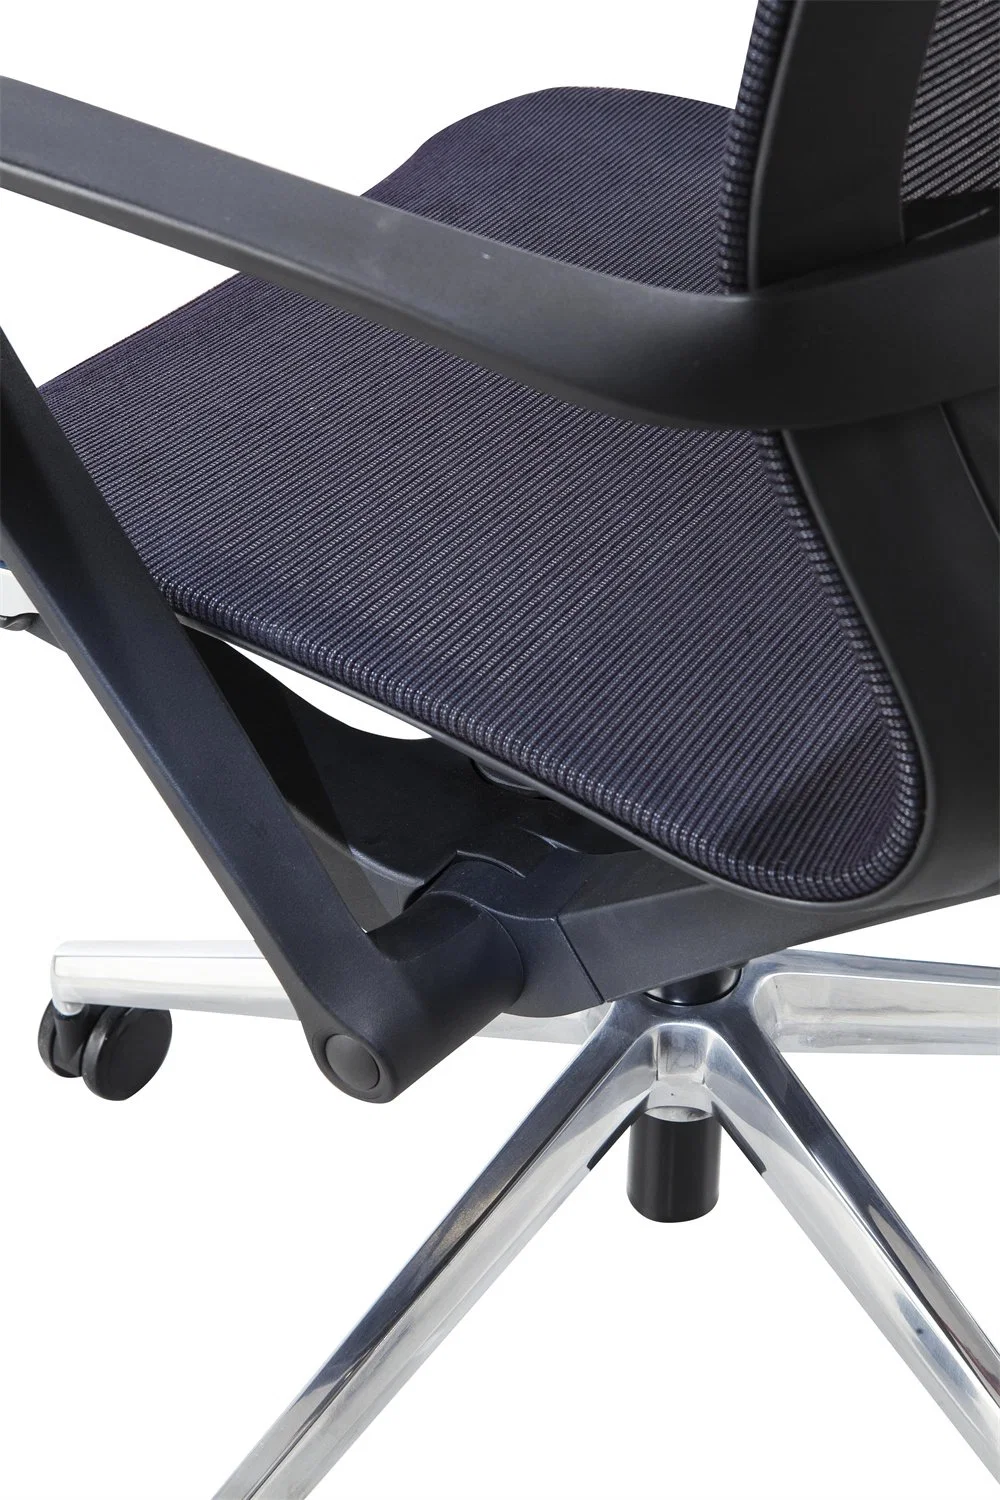 Office Independent Fix Armrests Middle Back Aluminium Gaming Study Ergonomic Mesh Chair